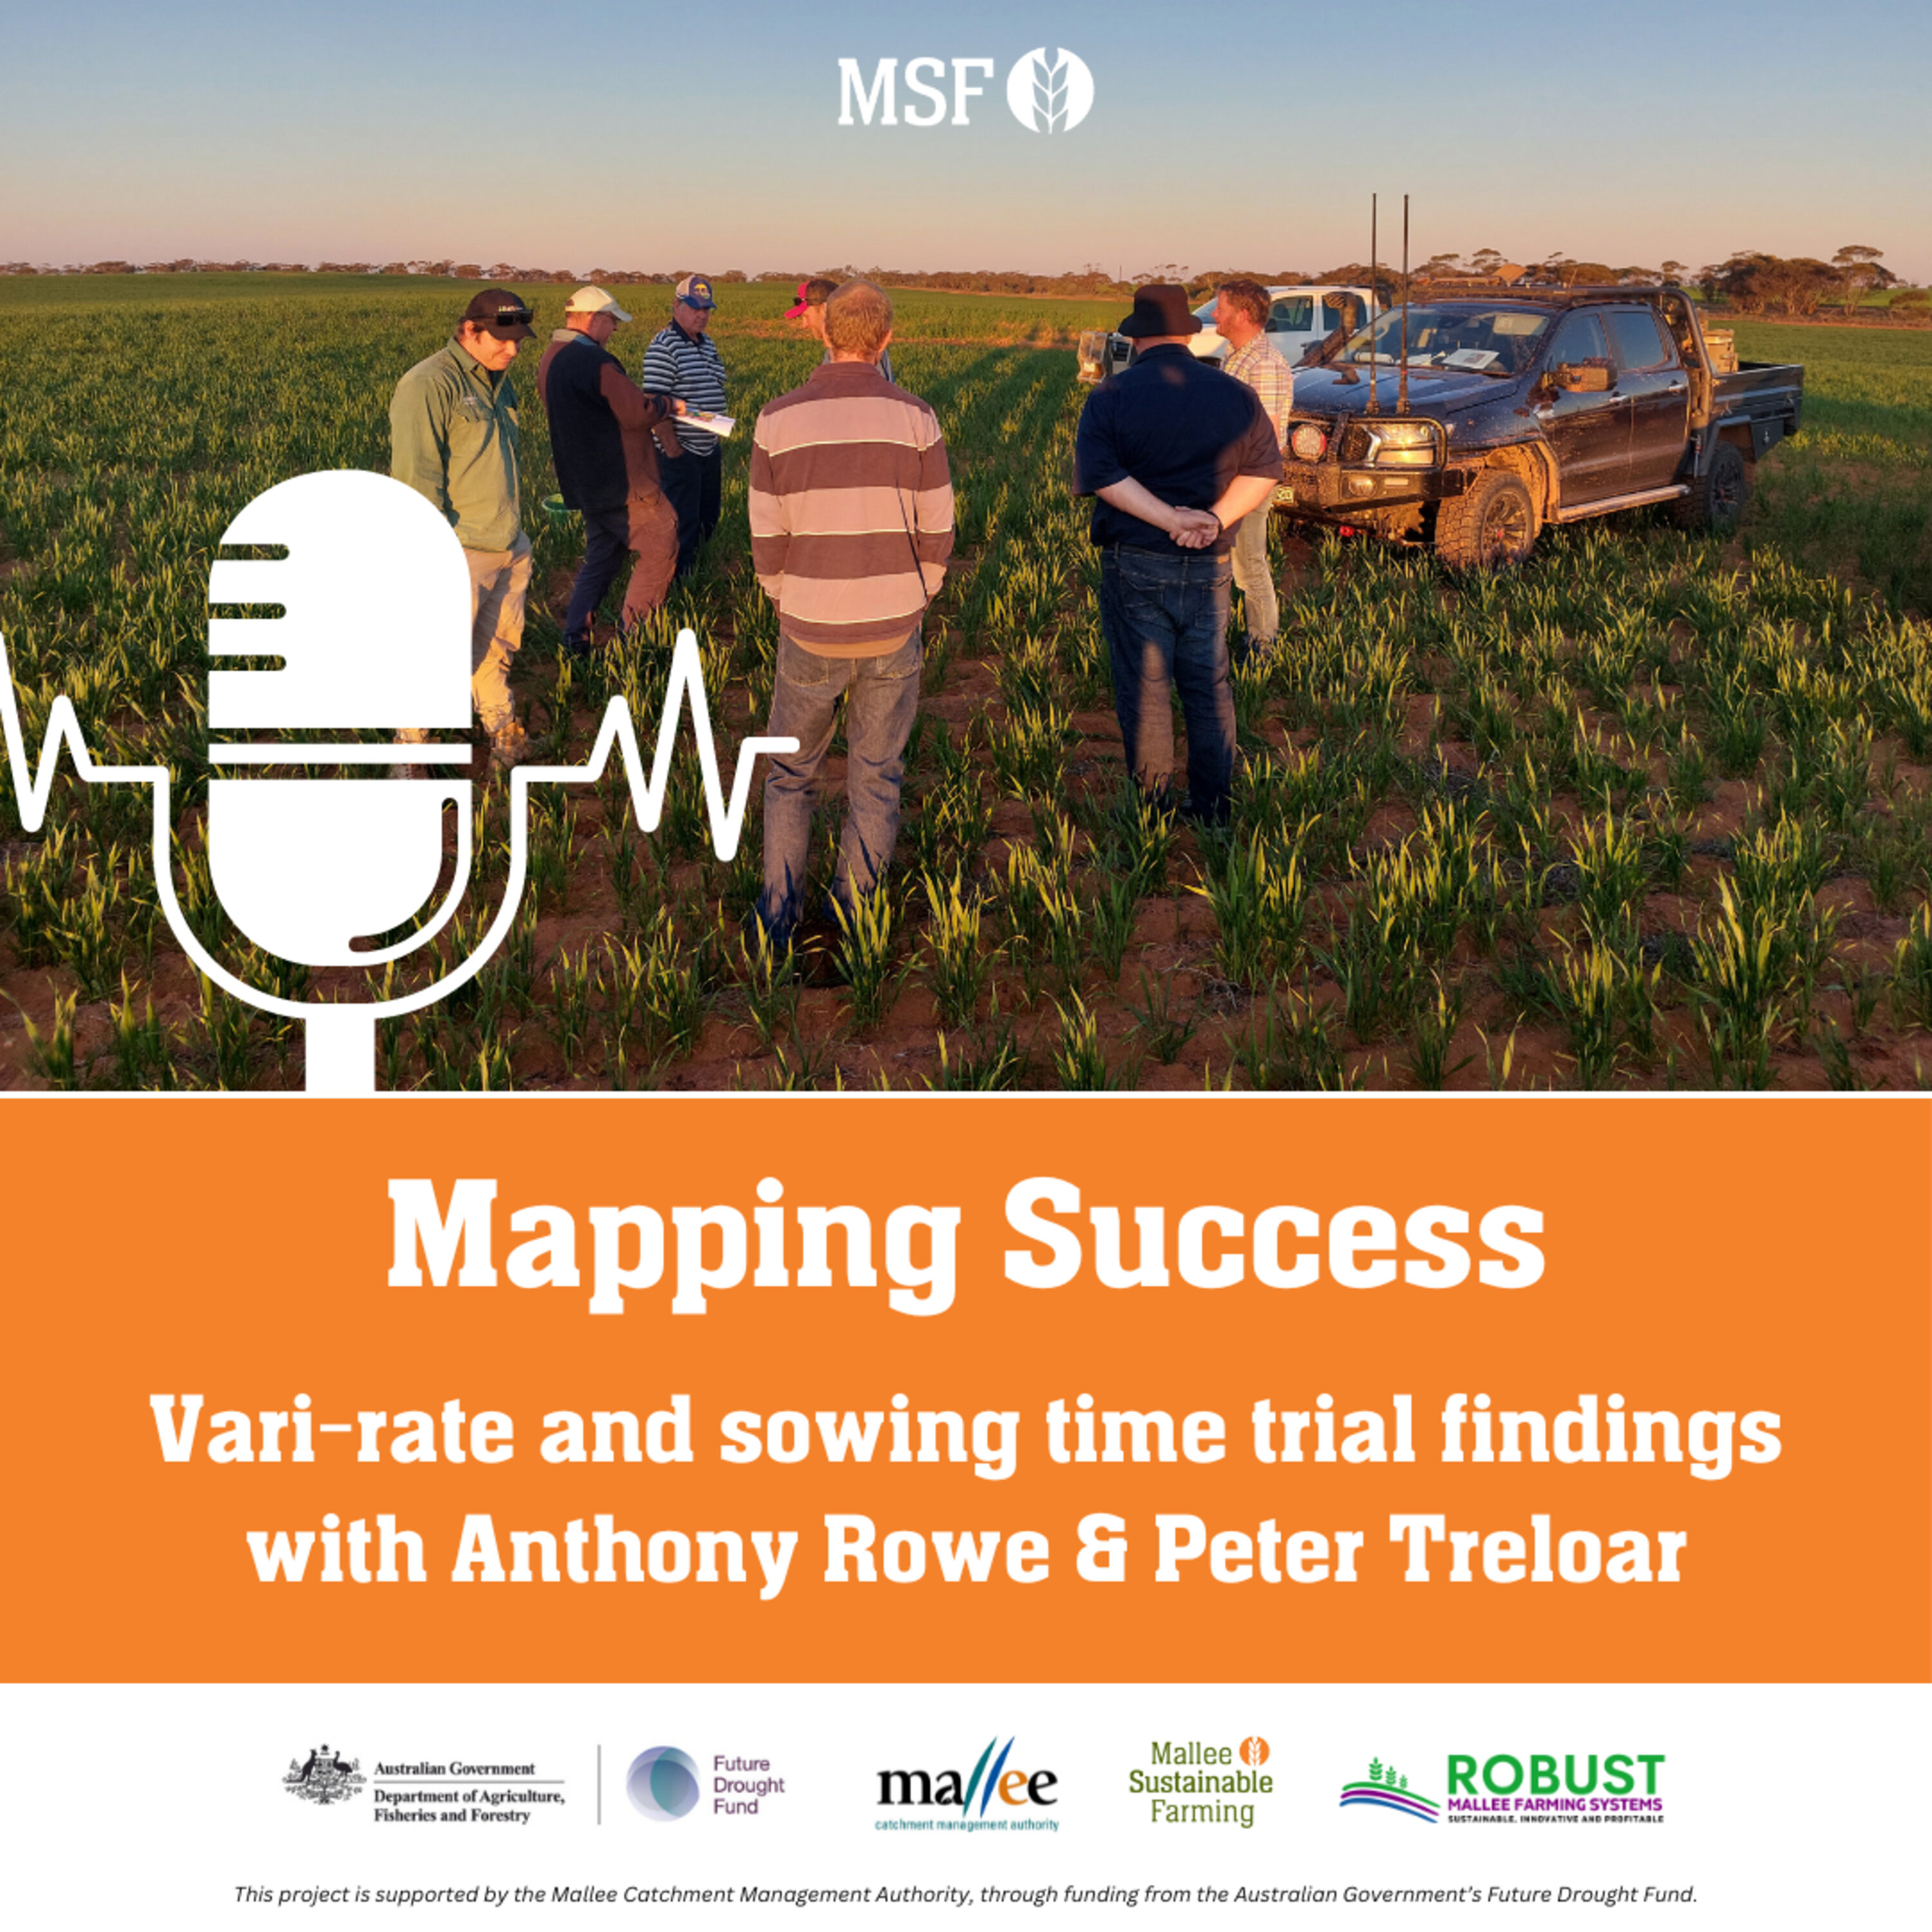 Mapping Success: Vari-Rate and sowing time trial findings with Anthony Rowe & Peter Treloar